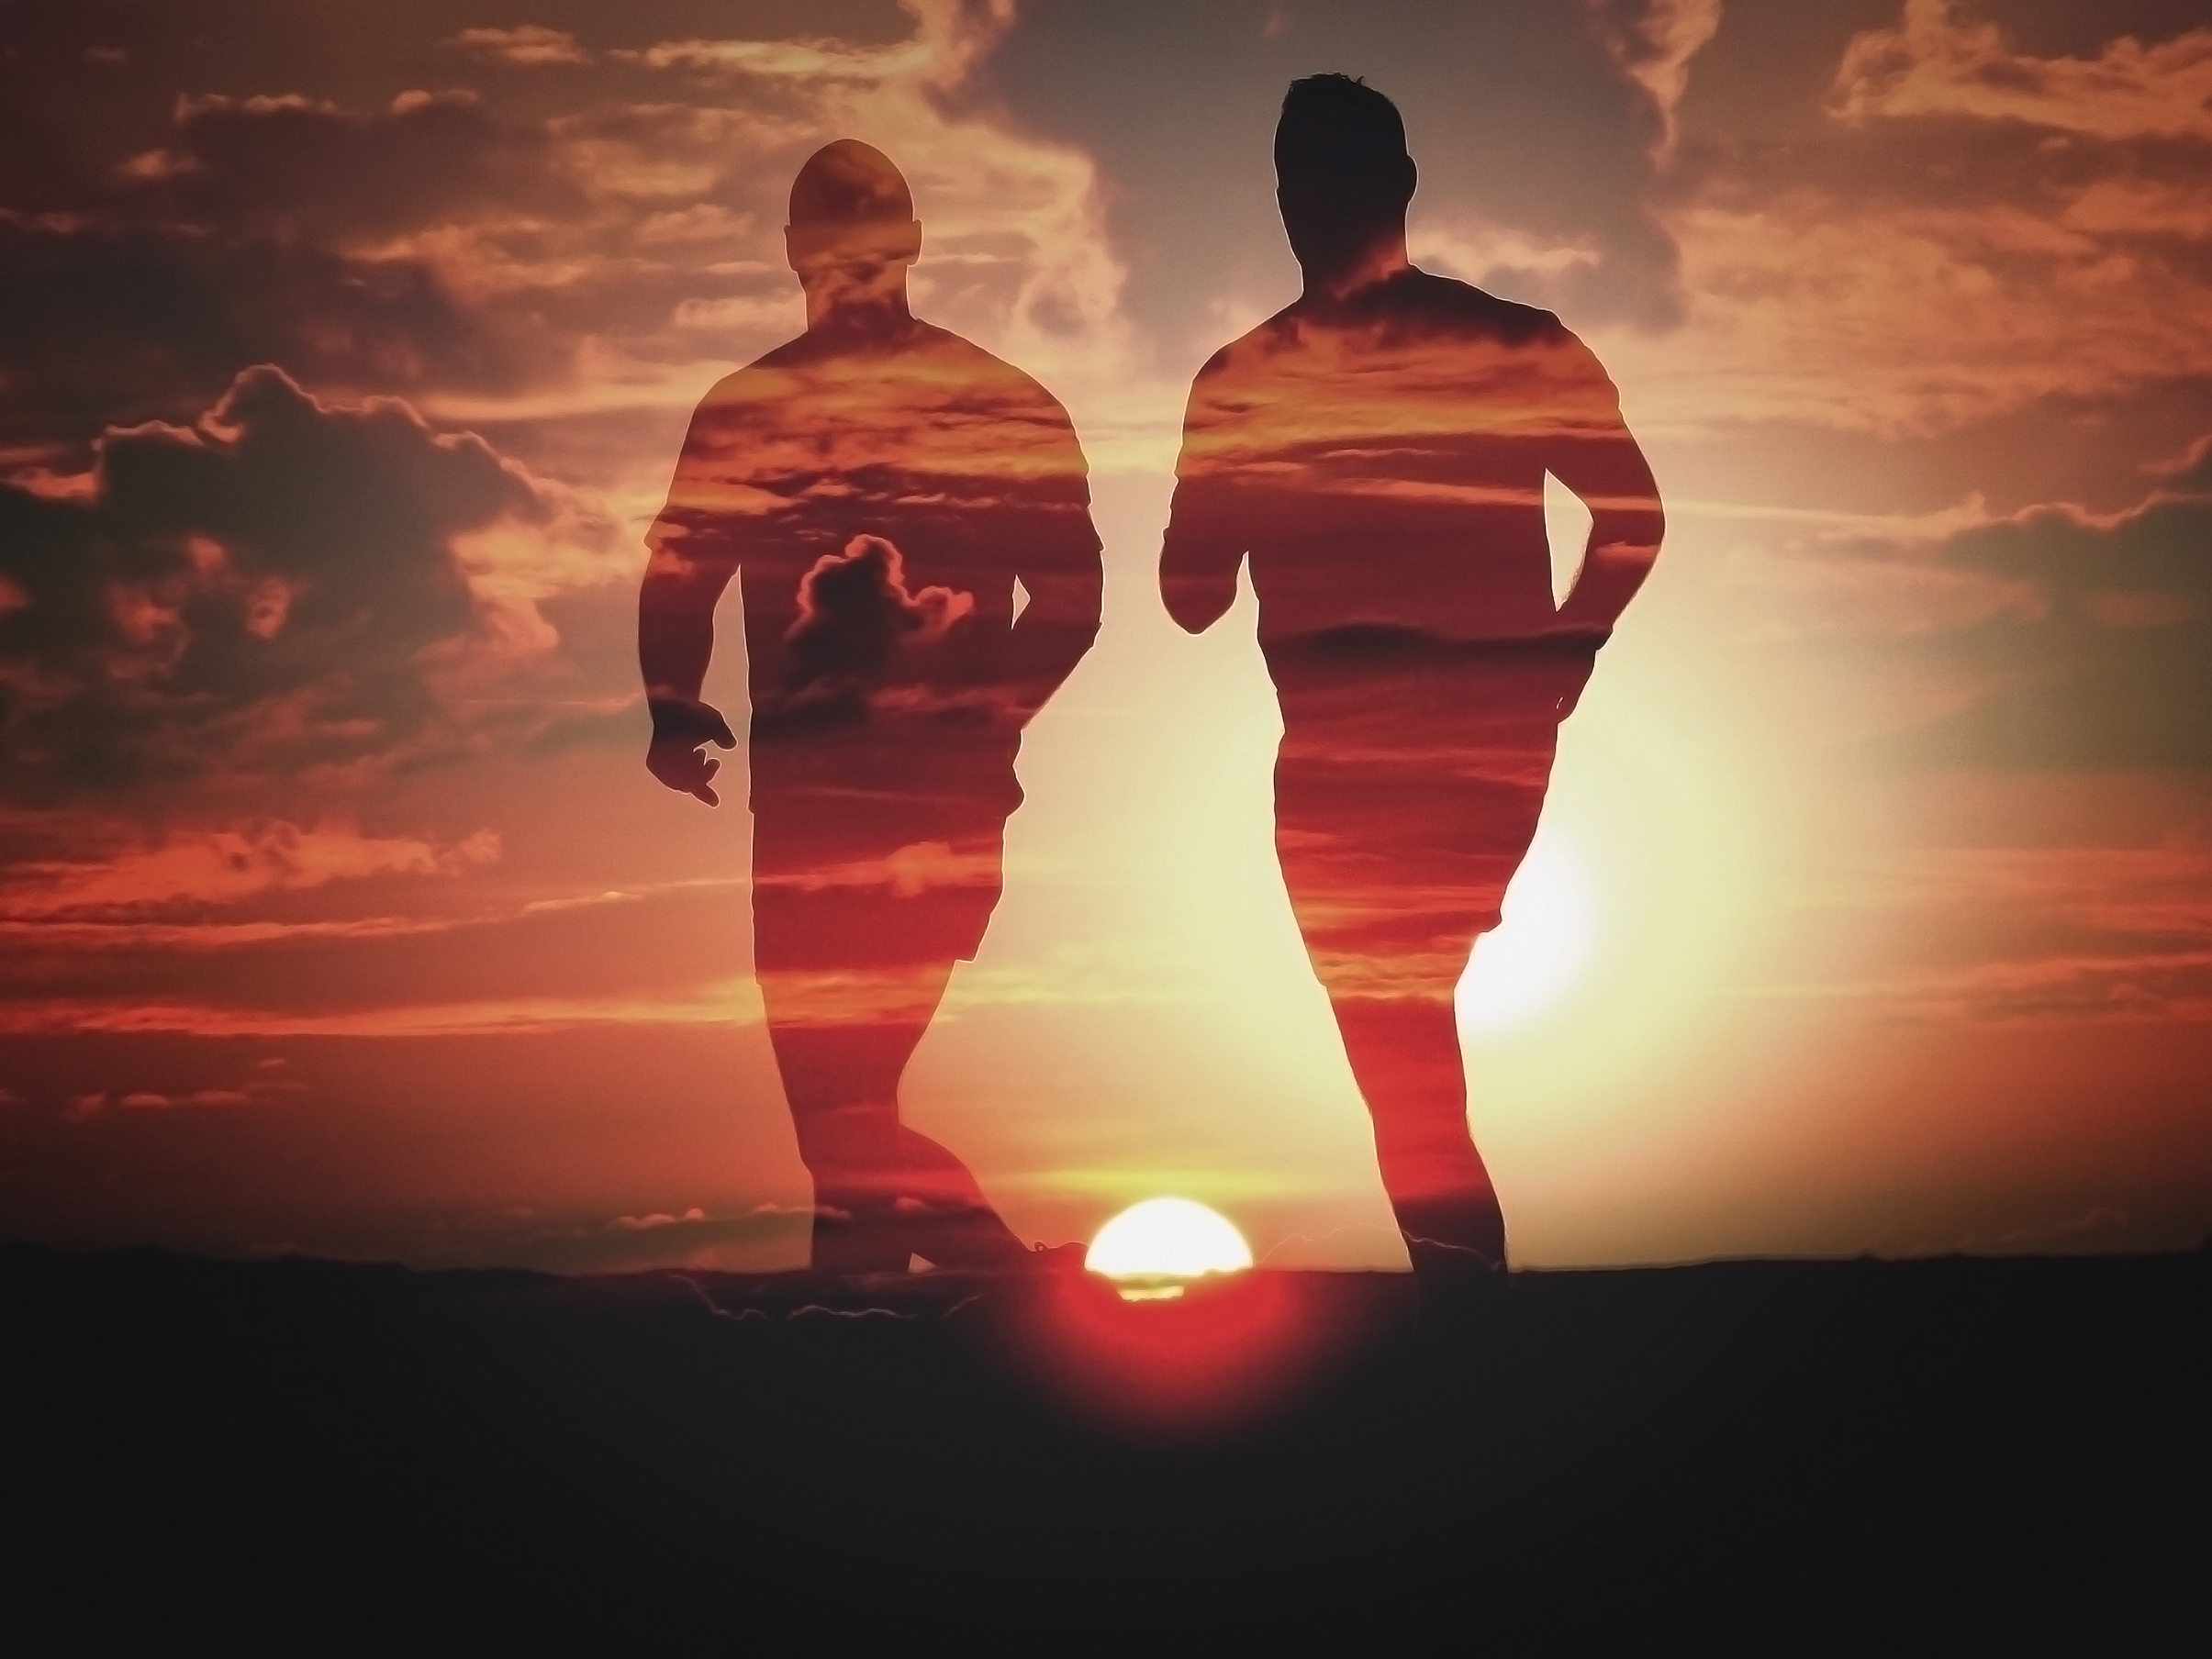 Men Running at Sunset - Double Exposure Effect, Person, Run, Road, Relaxation, HQ Photo